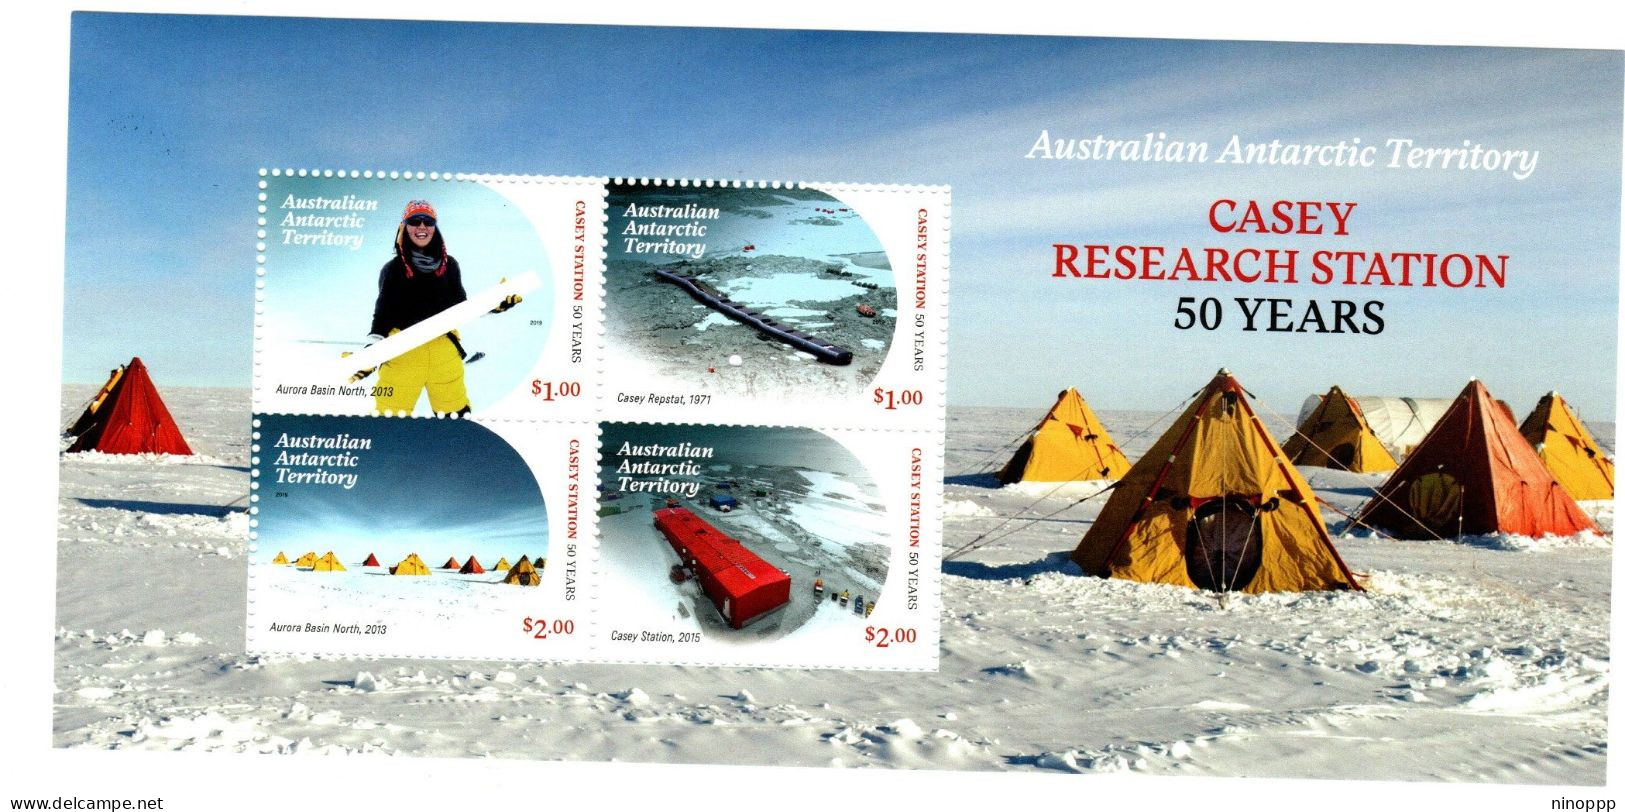 Australian Antarctic Territory ASC 257 MS  2019 Casey Research Station 50 Years, Minisheet ,mint Never Hinged - Used Stamps